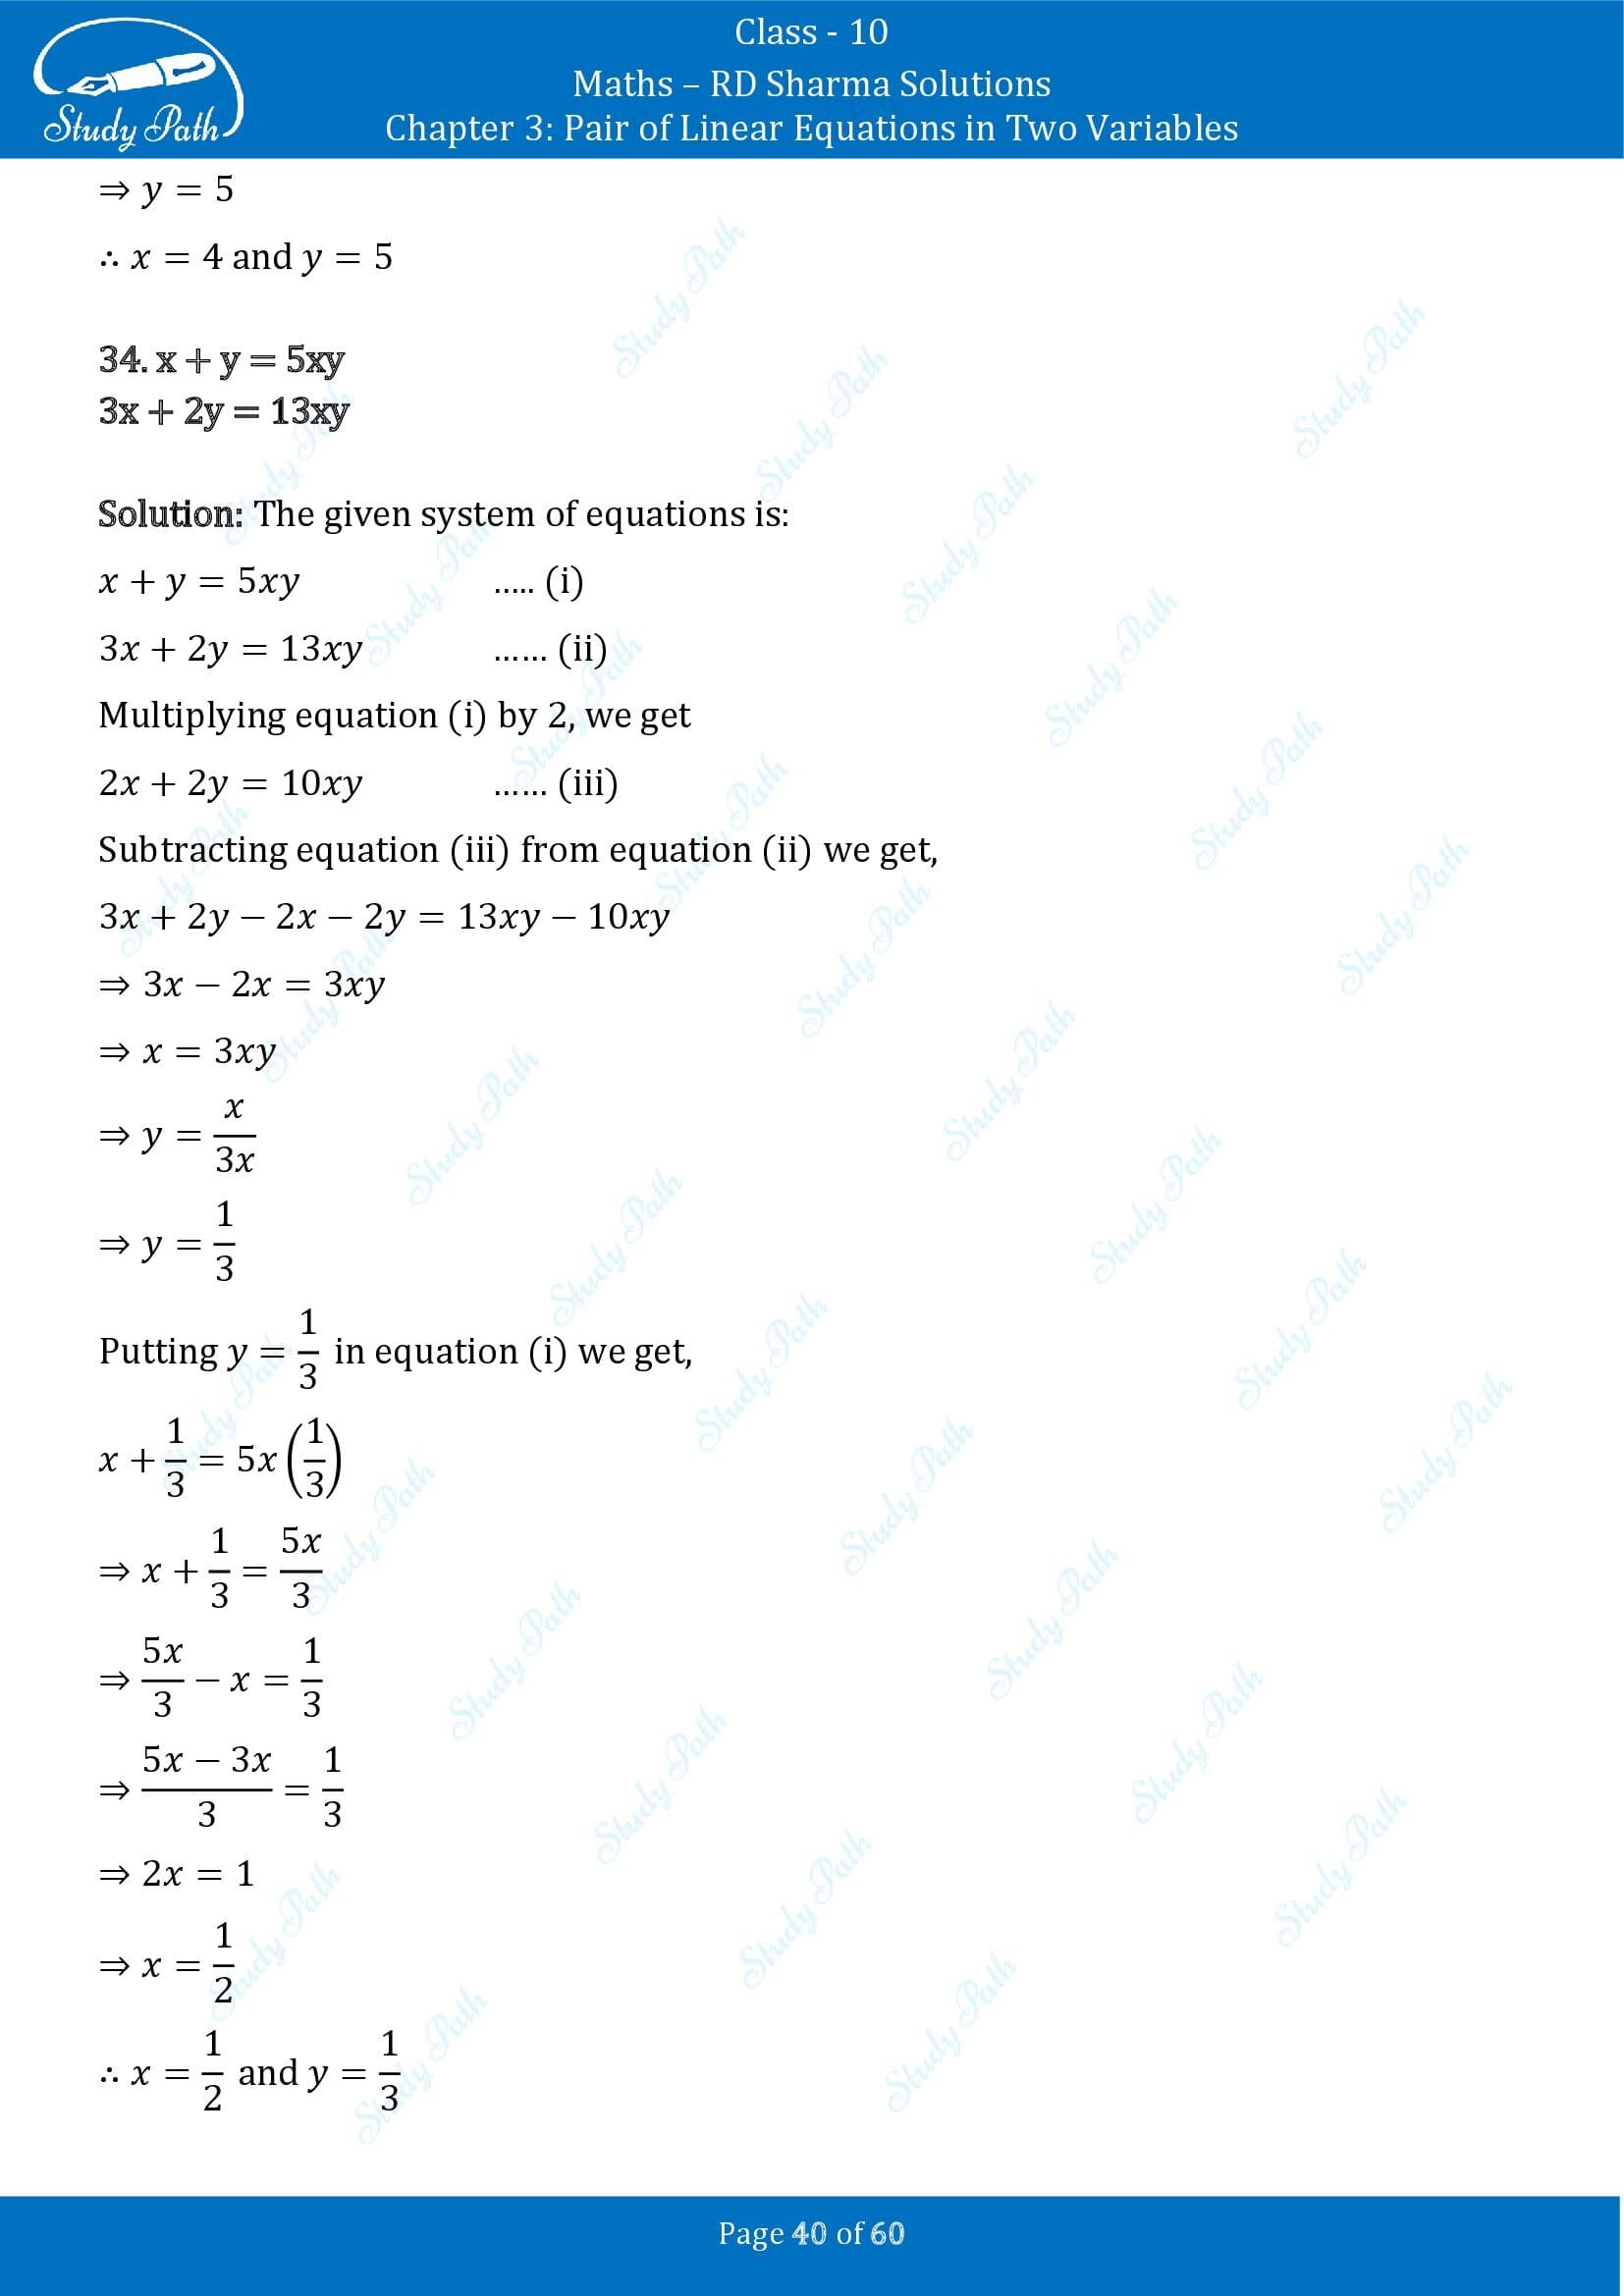 RD Sharma Solutions Class 10 Chapter 3 Pair of Linear Equations in Two Variables Exercise 3.3 00040